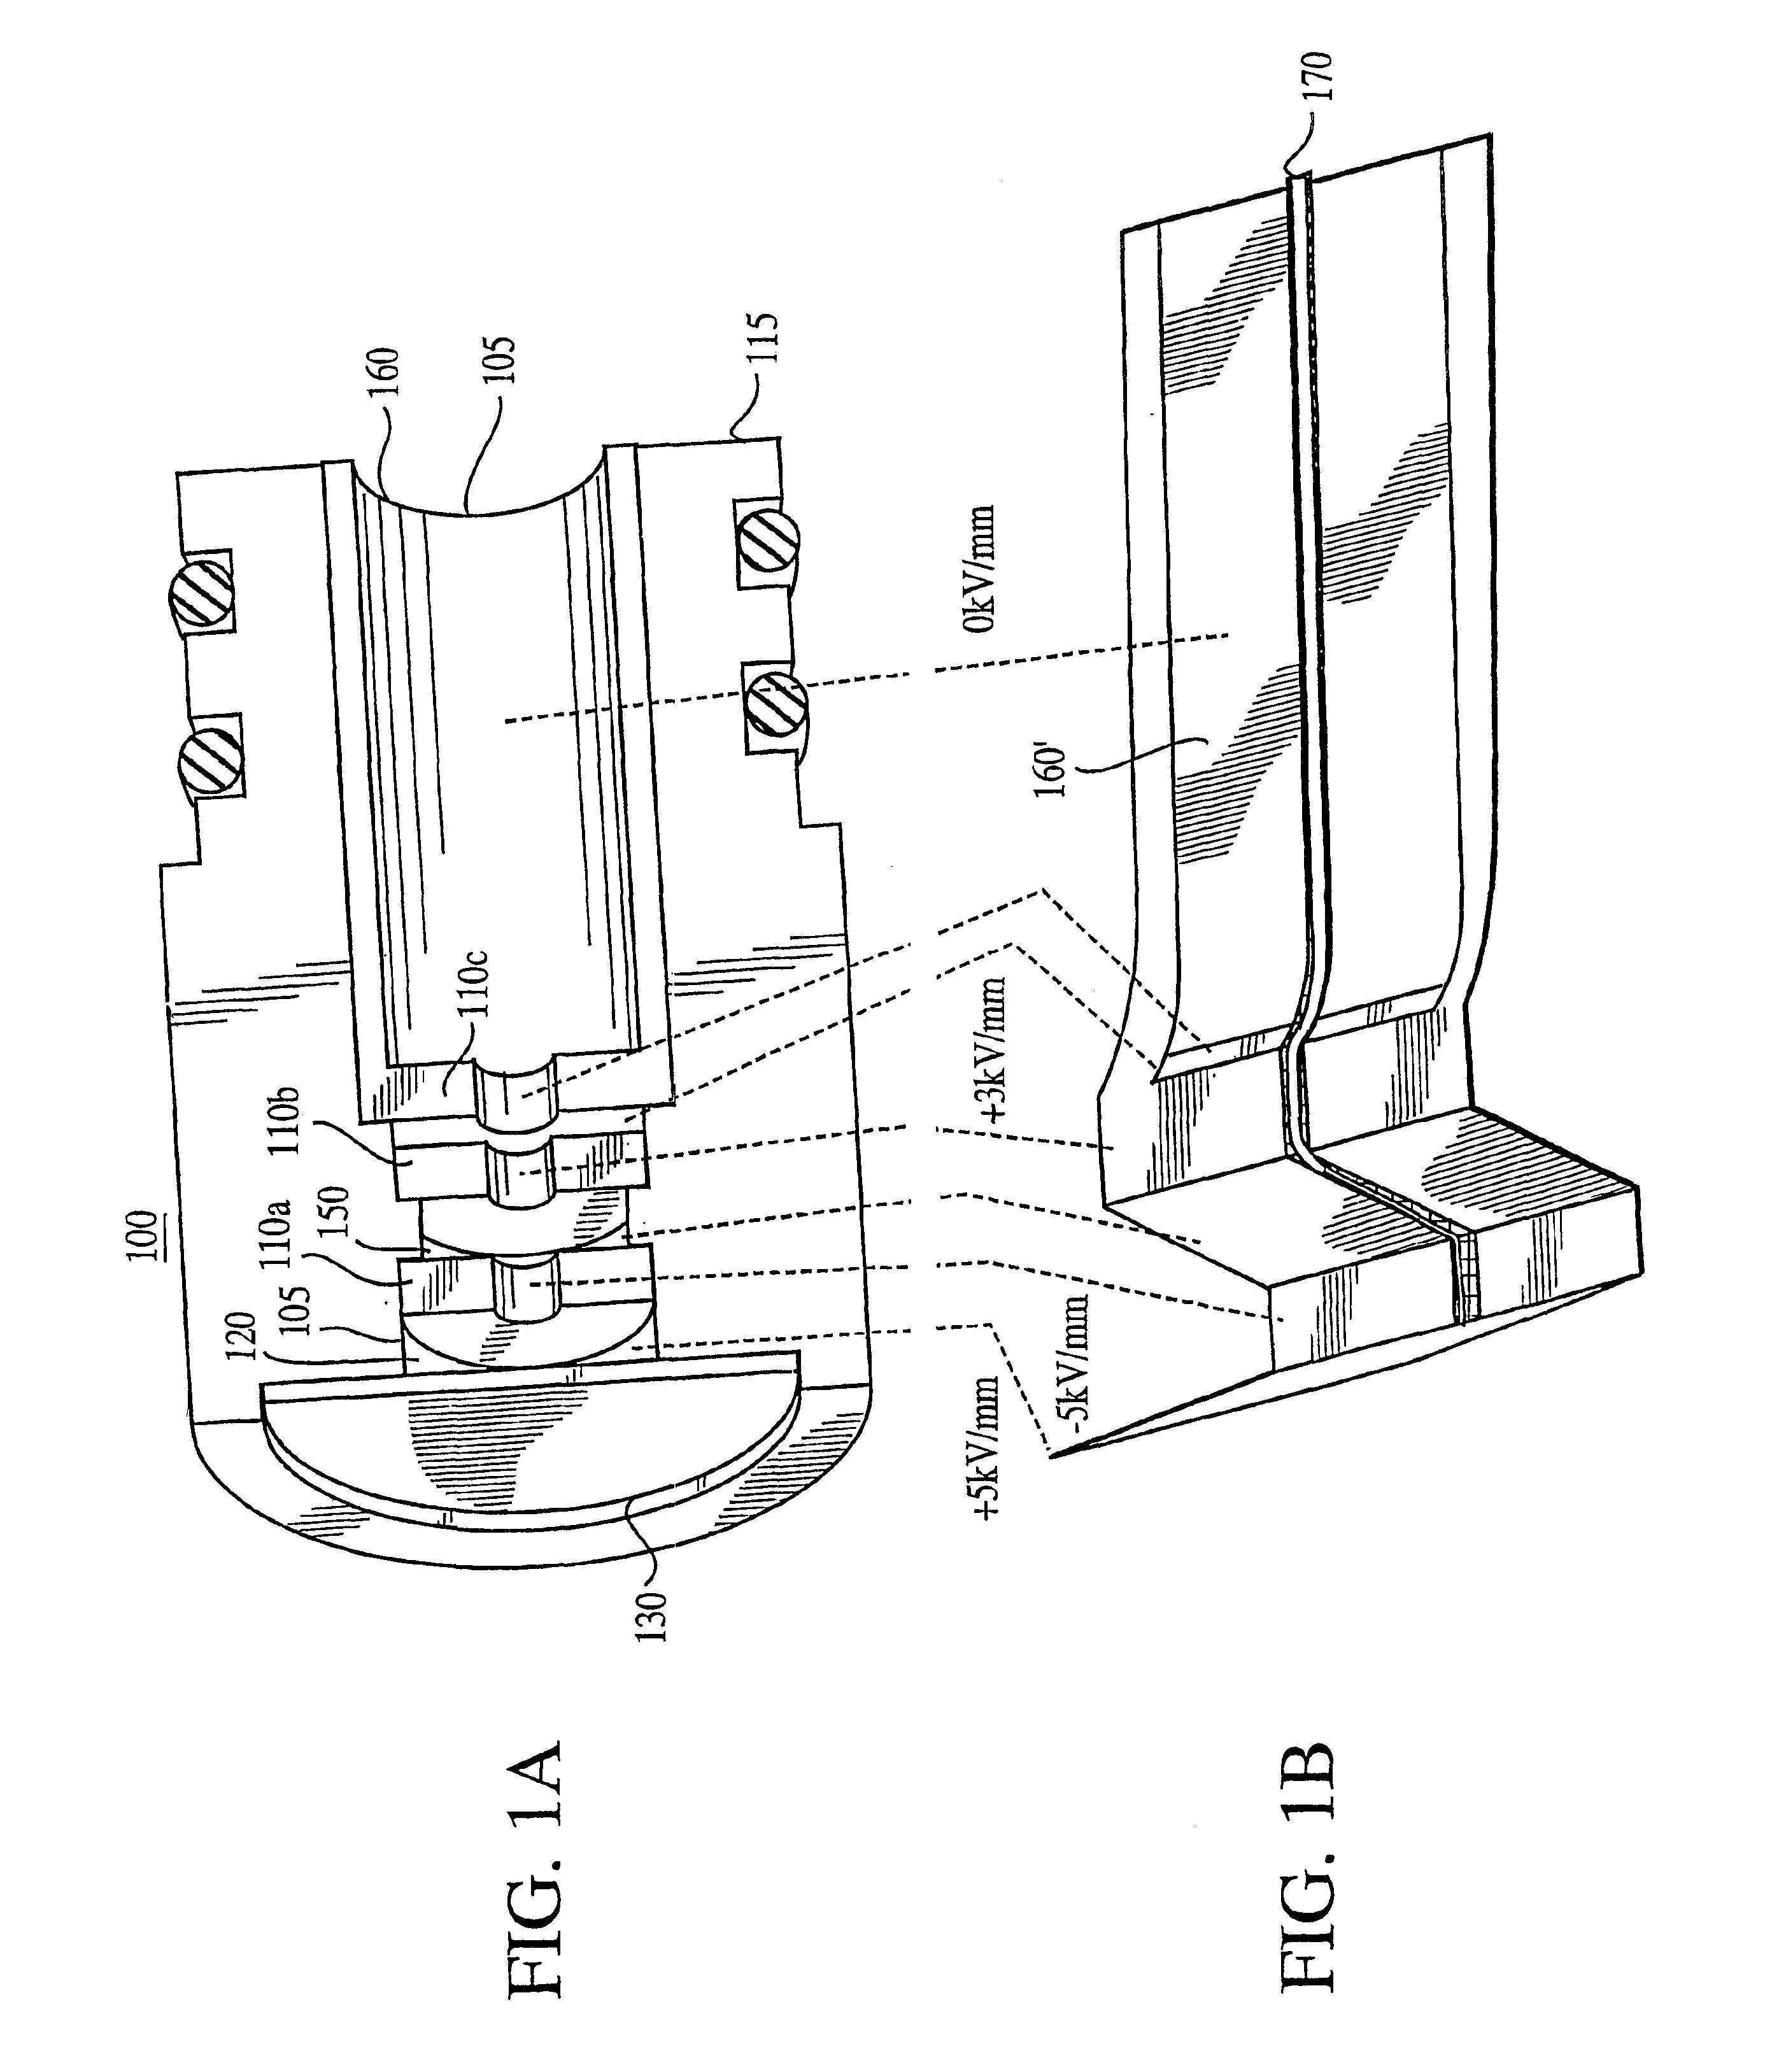 Microchannel plate detector assembly for a time-of-flight mass spectrometer